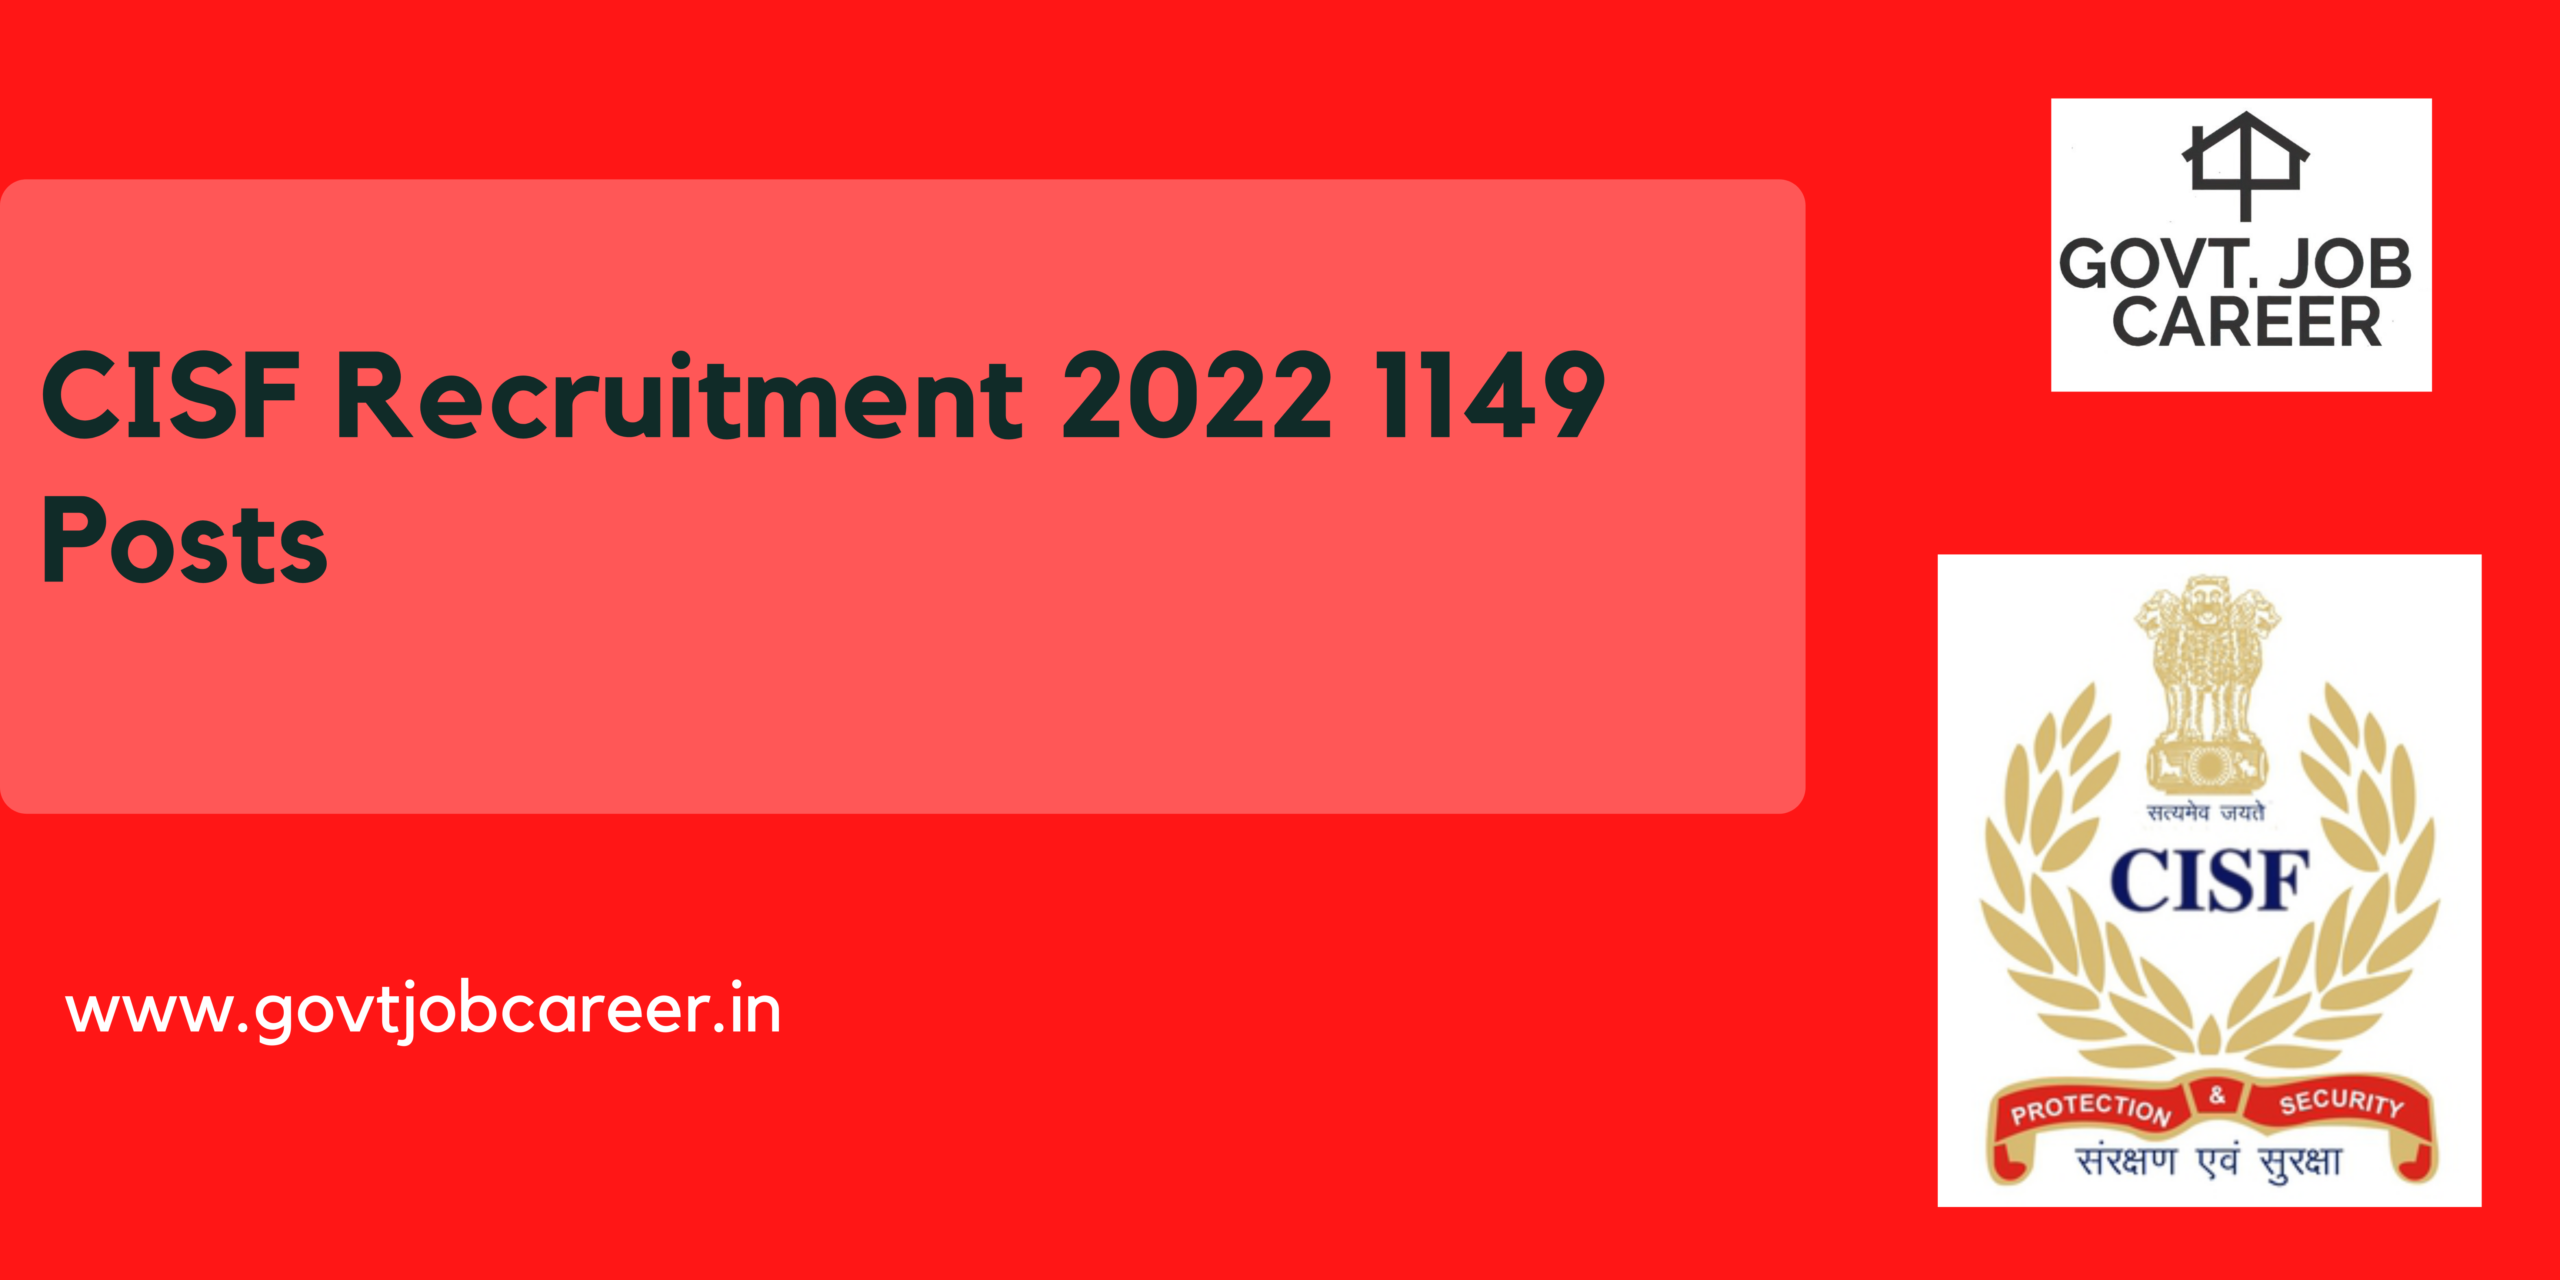 CISF Recruitment 2022. Central Industrial Security Force has invited application for Male Indian citizens for filling up the temporary posts of Constable (Fire). Apply for Govt. of India Job.